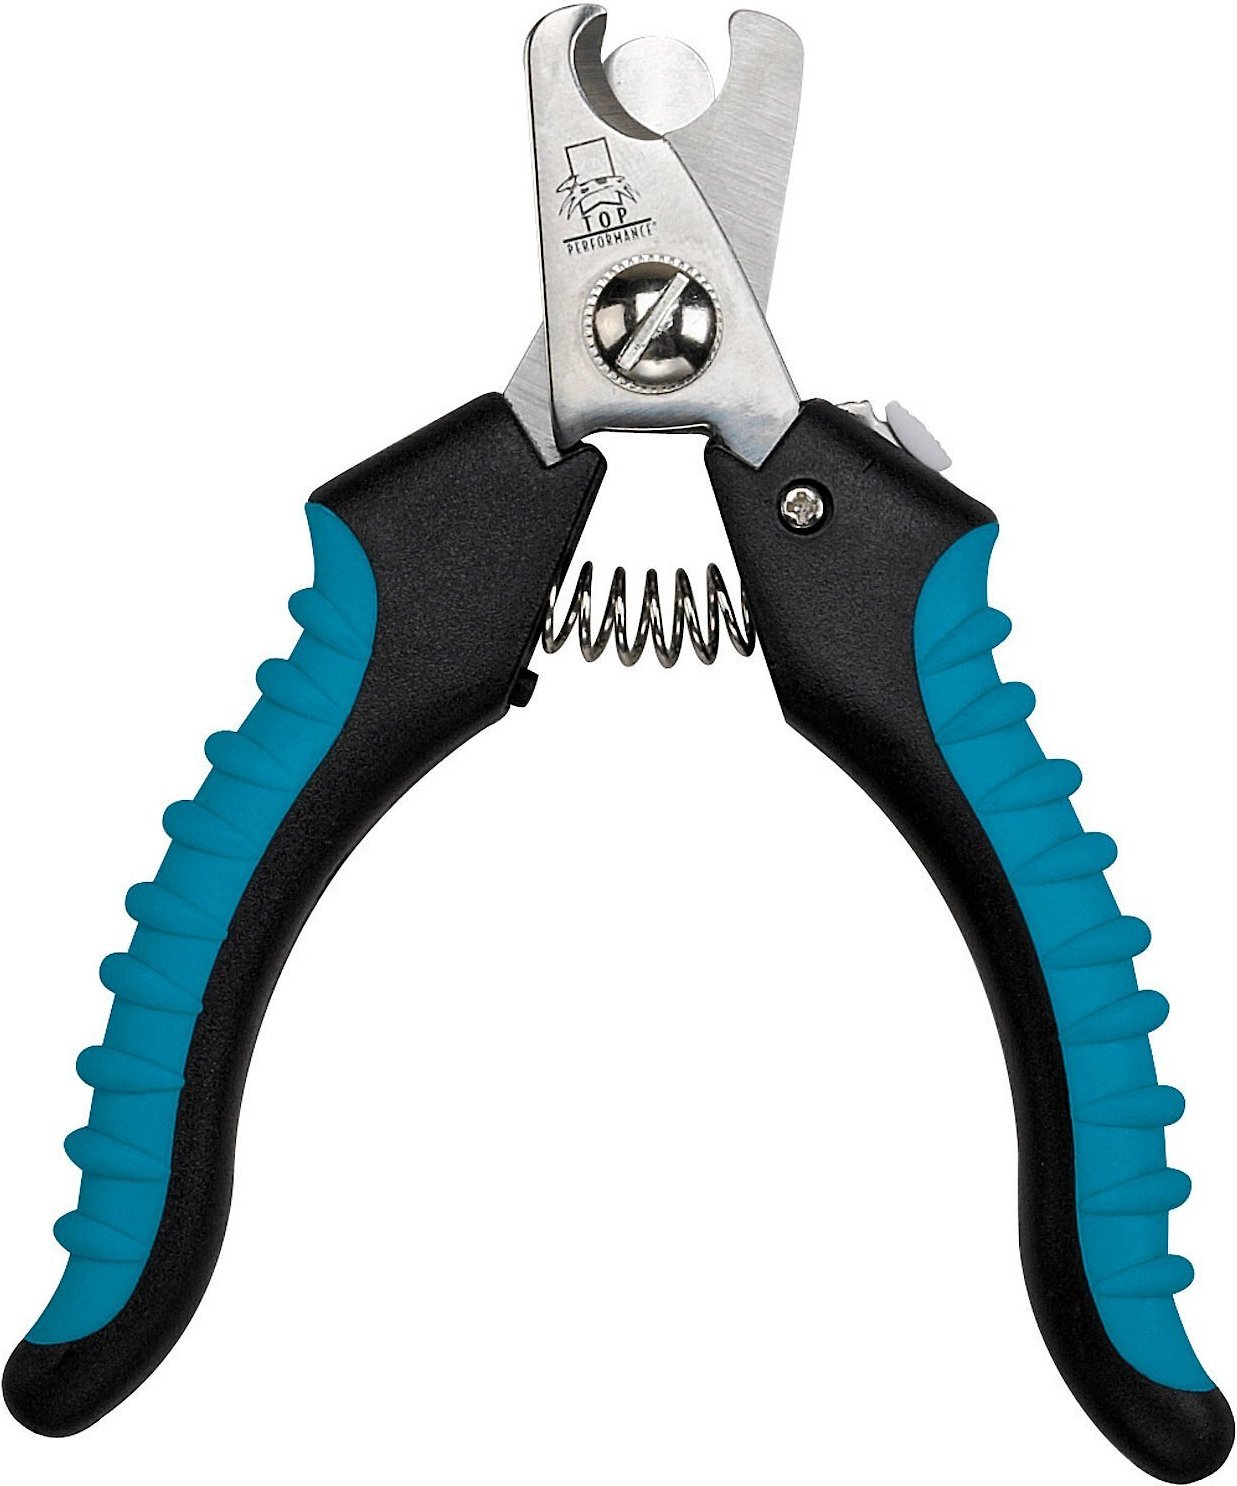 professional dog grooming nail clippers